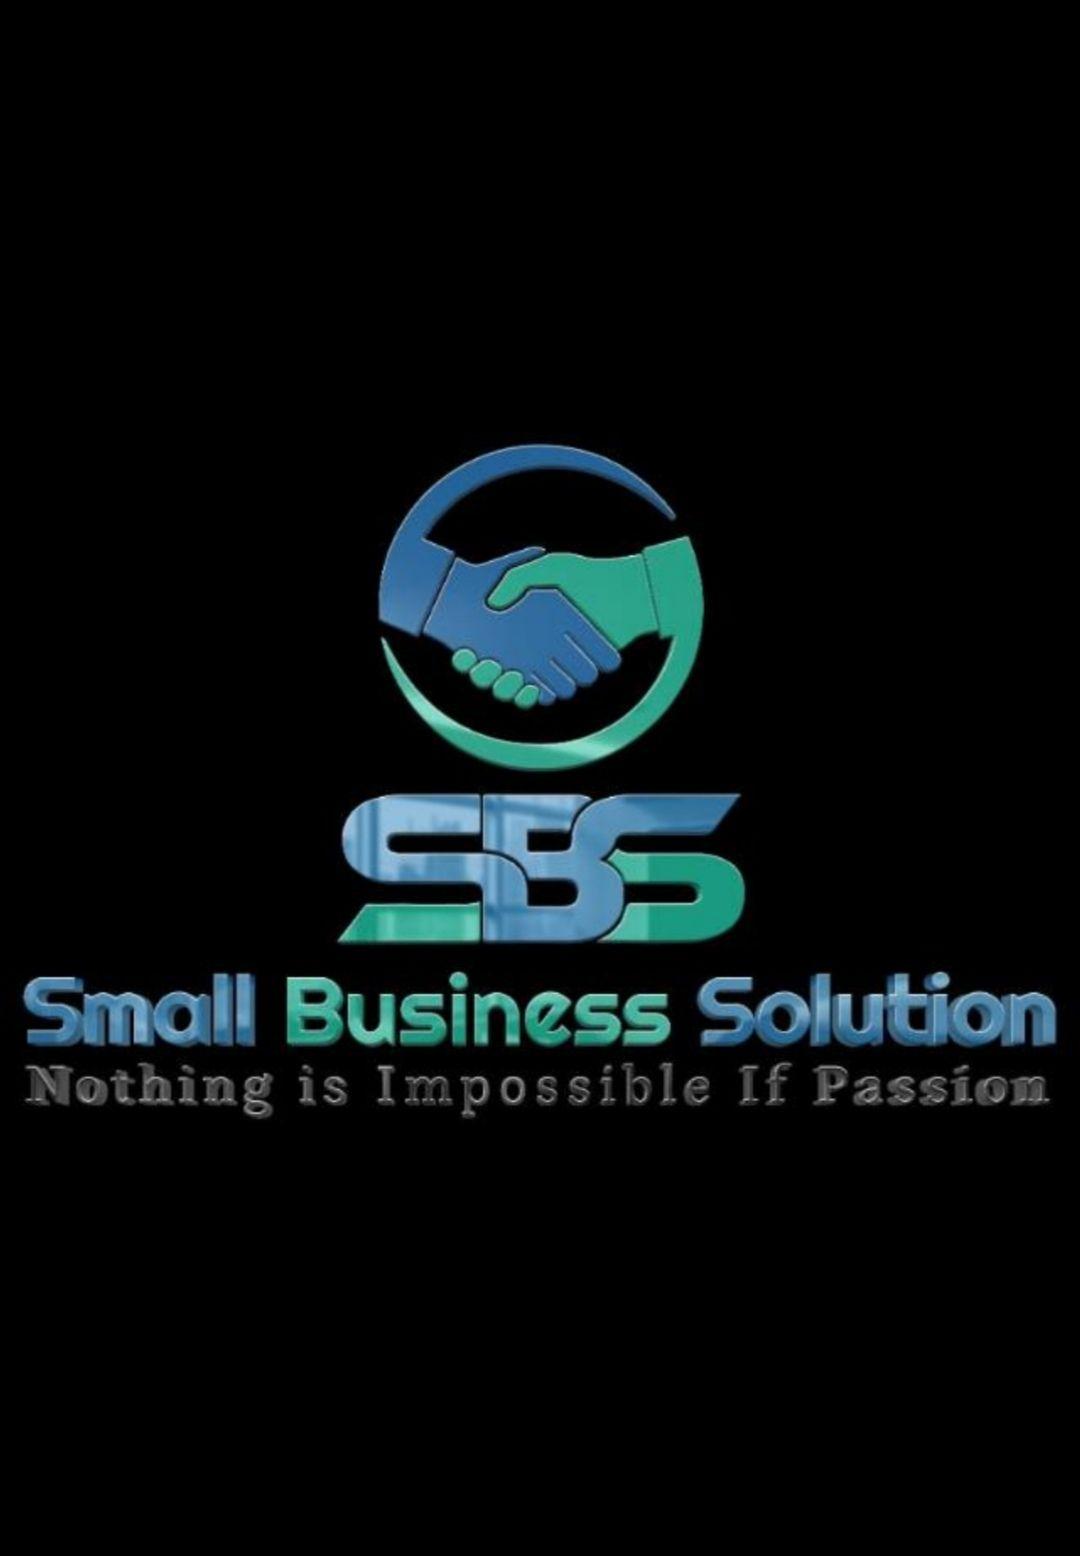 SMALL BUSINESS SOLUTION